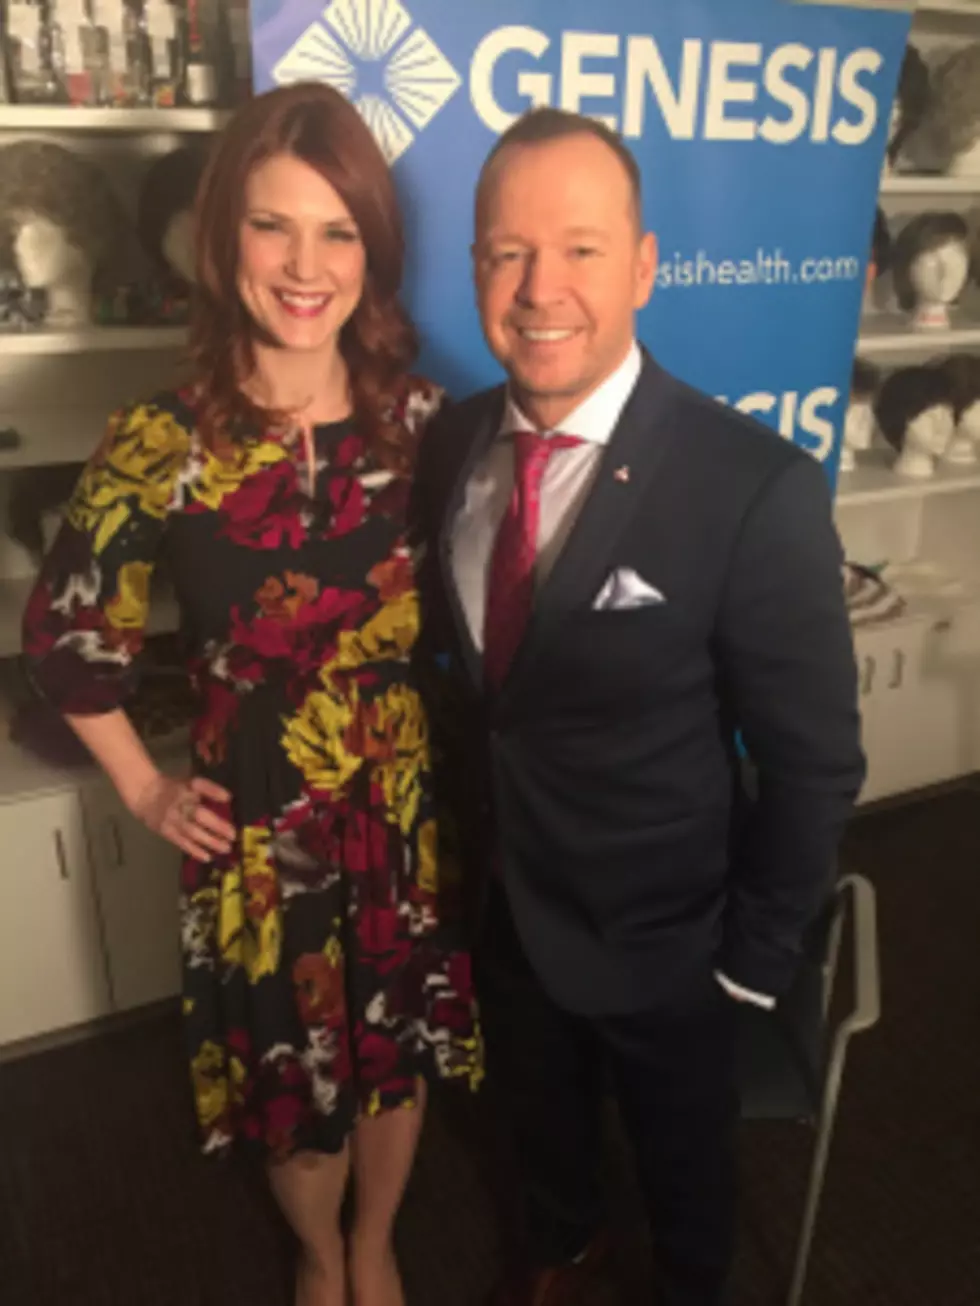 How Donnie Wahlberg Helped WQAD’s Denise Hnytka Announce Her Pregnency